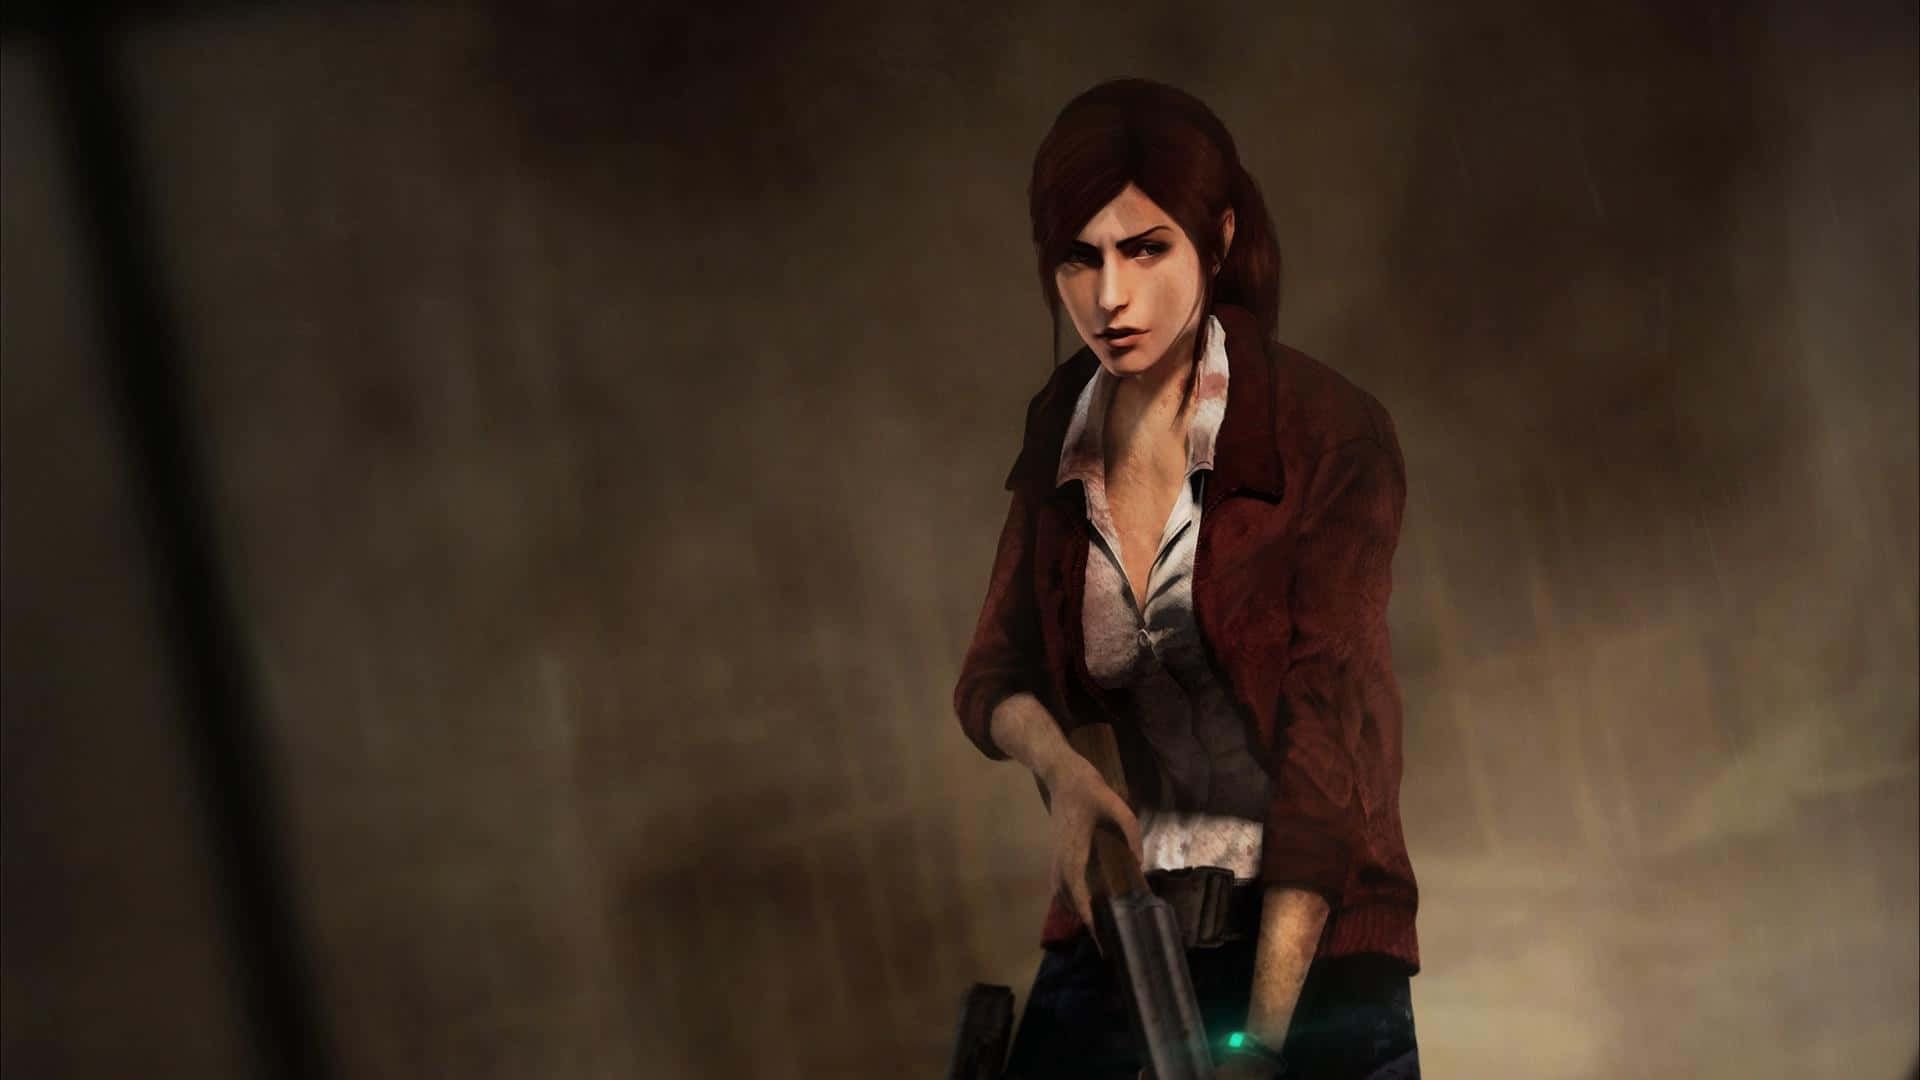 Ready to courageously face a new enemy in Resident Evil Revelations 2? Wallpaper